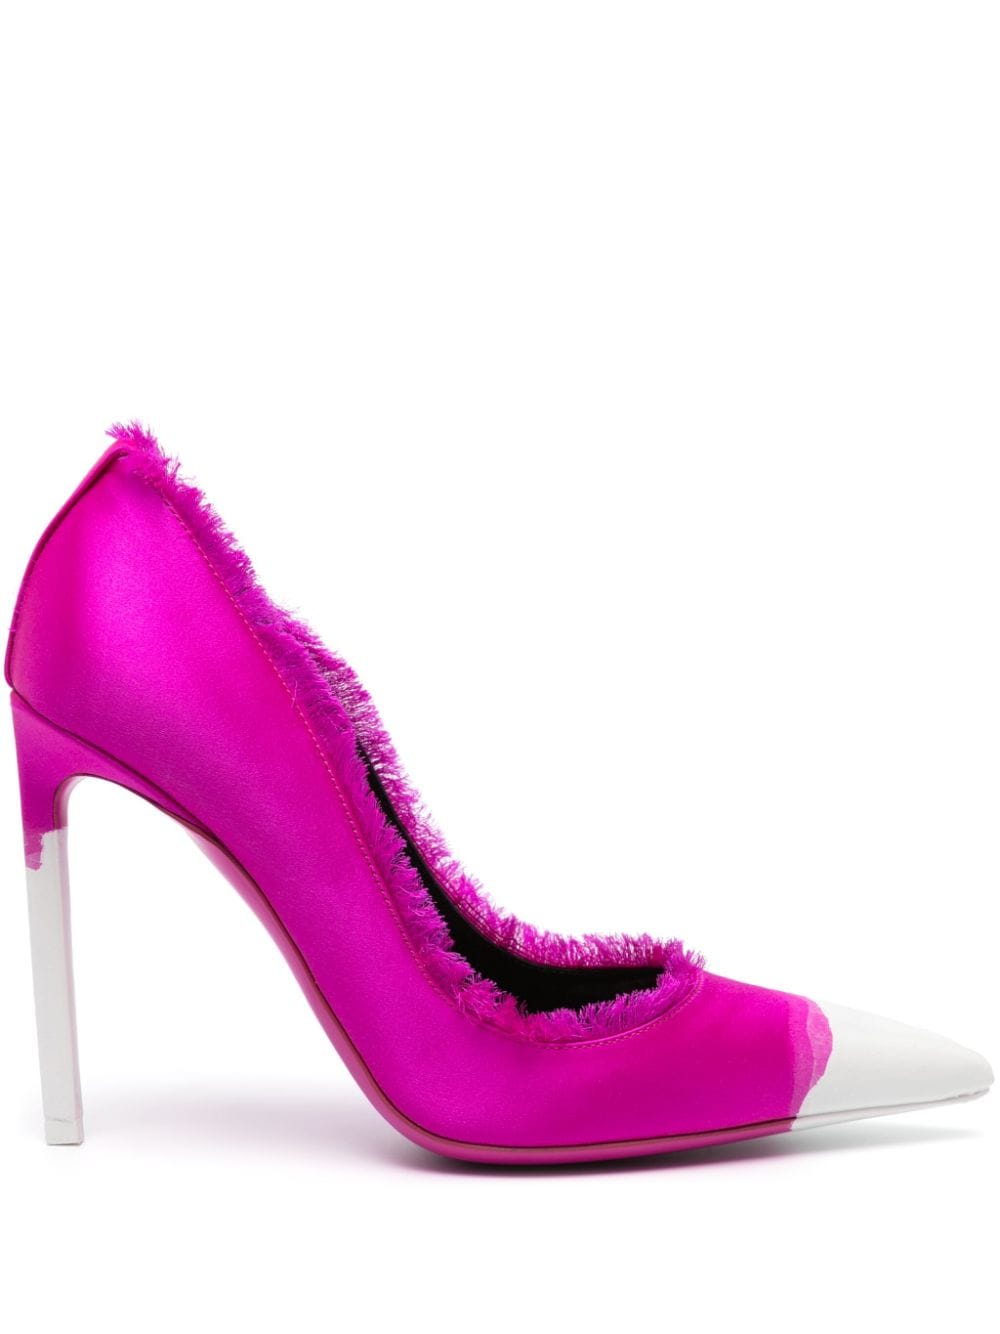 TOM FORD painted satin pumps - Pink von TOM FORD